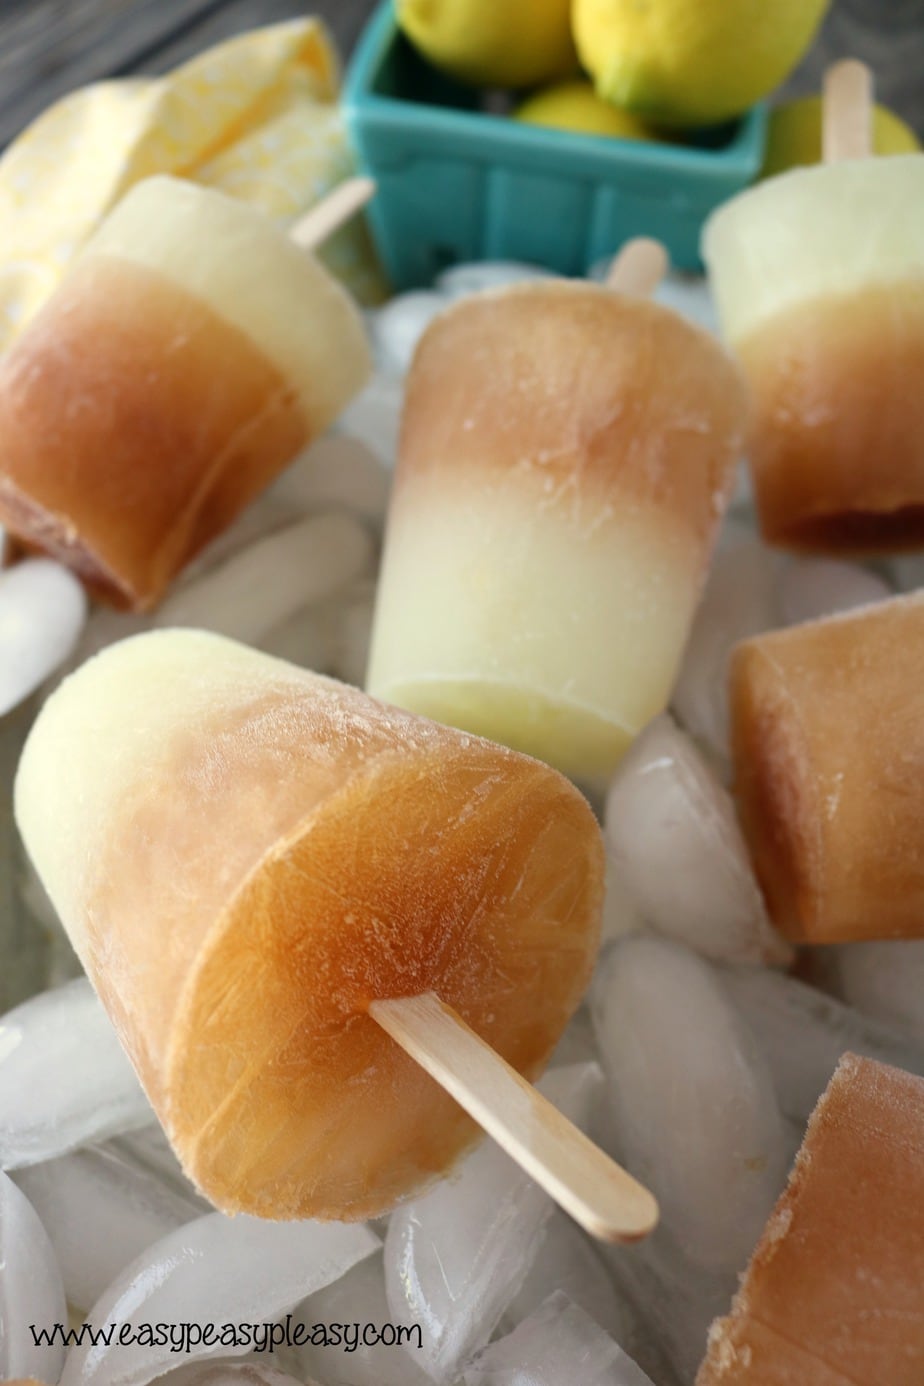 Y'all will go crazy over these super easy homemade Arnold Palmer Popsicles. These homemade popsicles are kid approved.